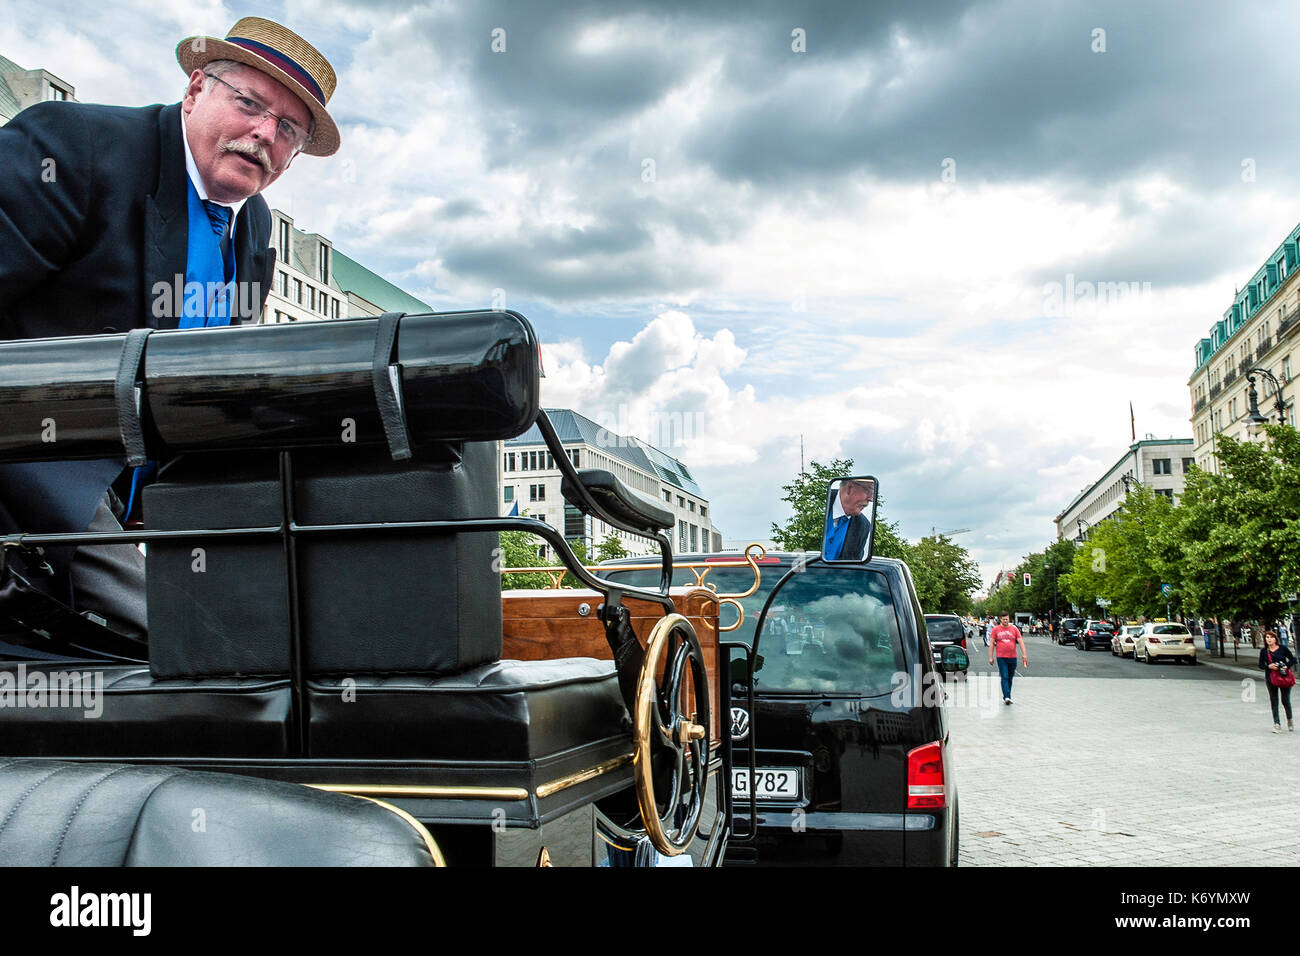 Germany Vintage style car with driver dressed in typical uniform, in Pariser Platz, Berlin Stock Photo